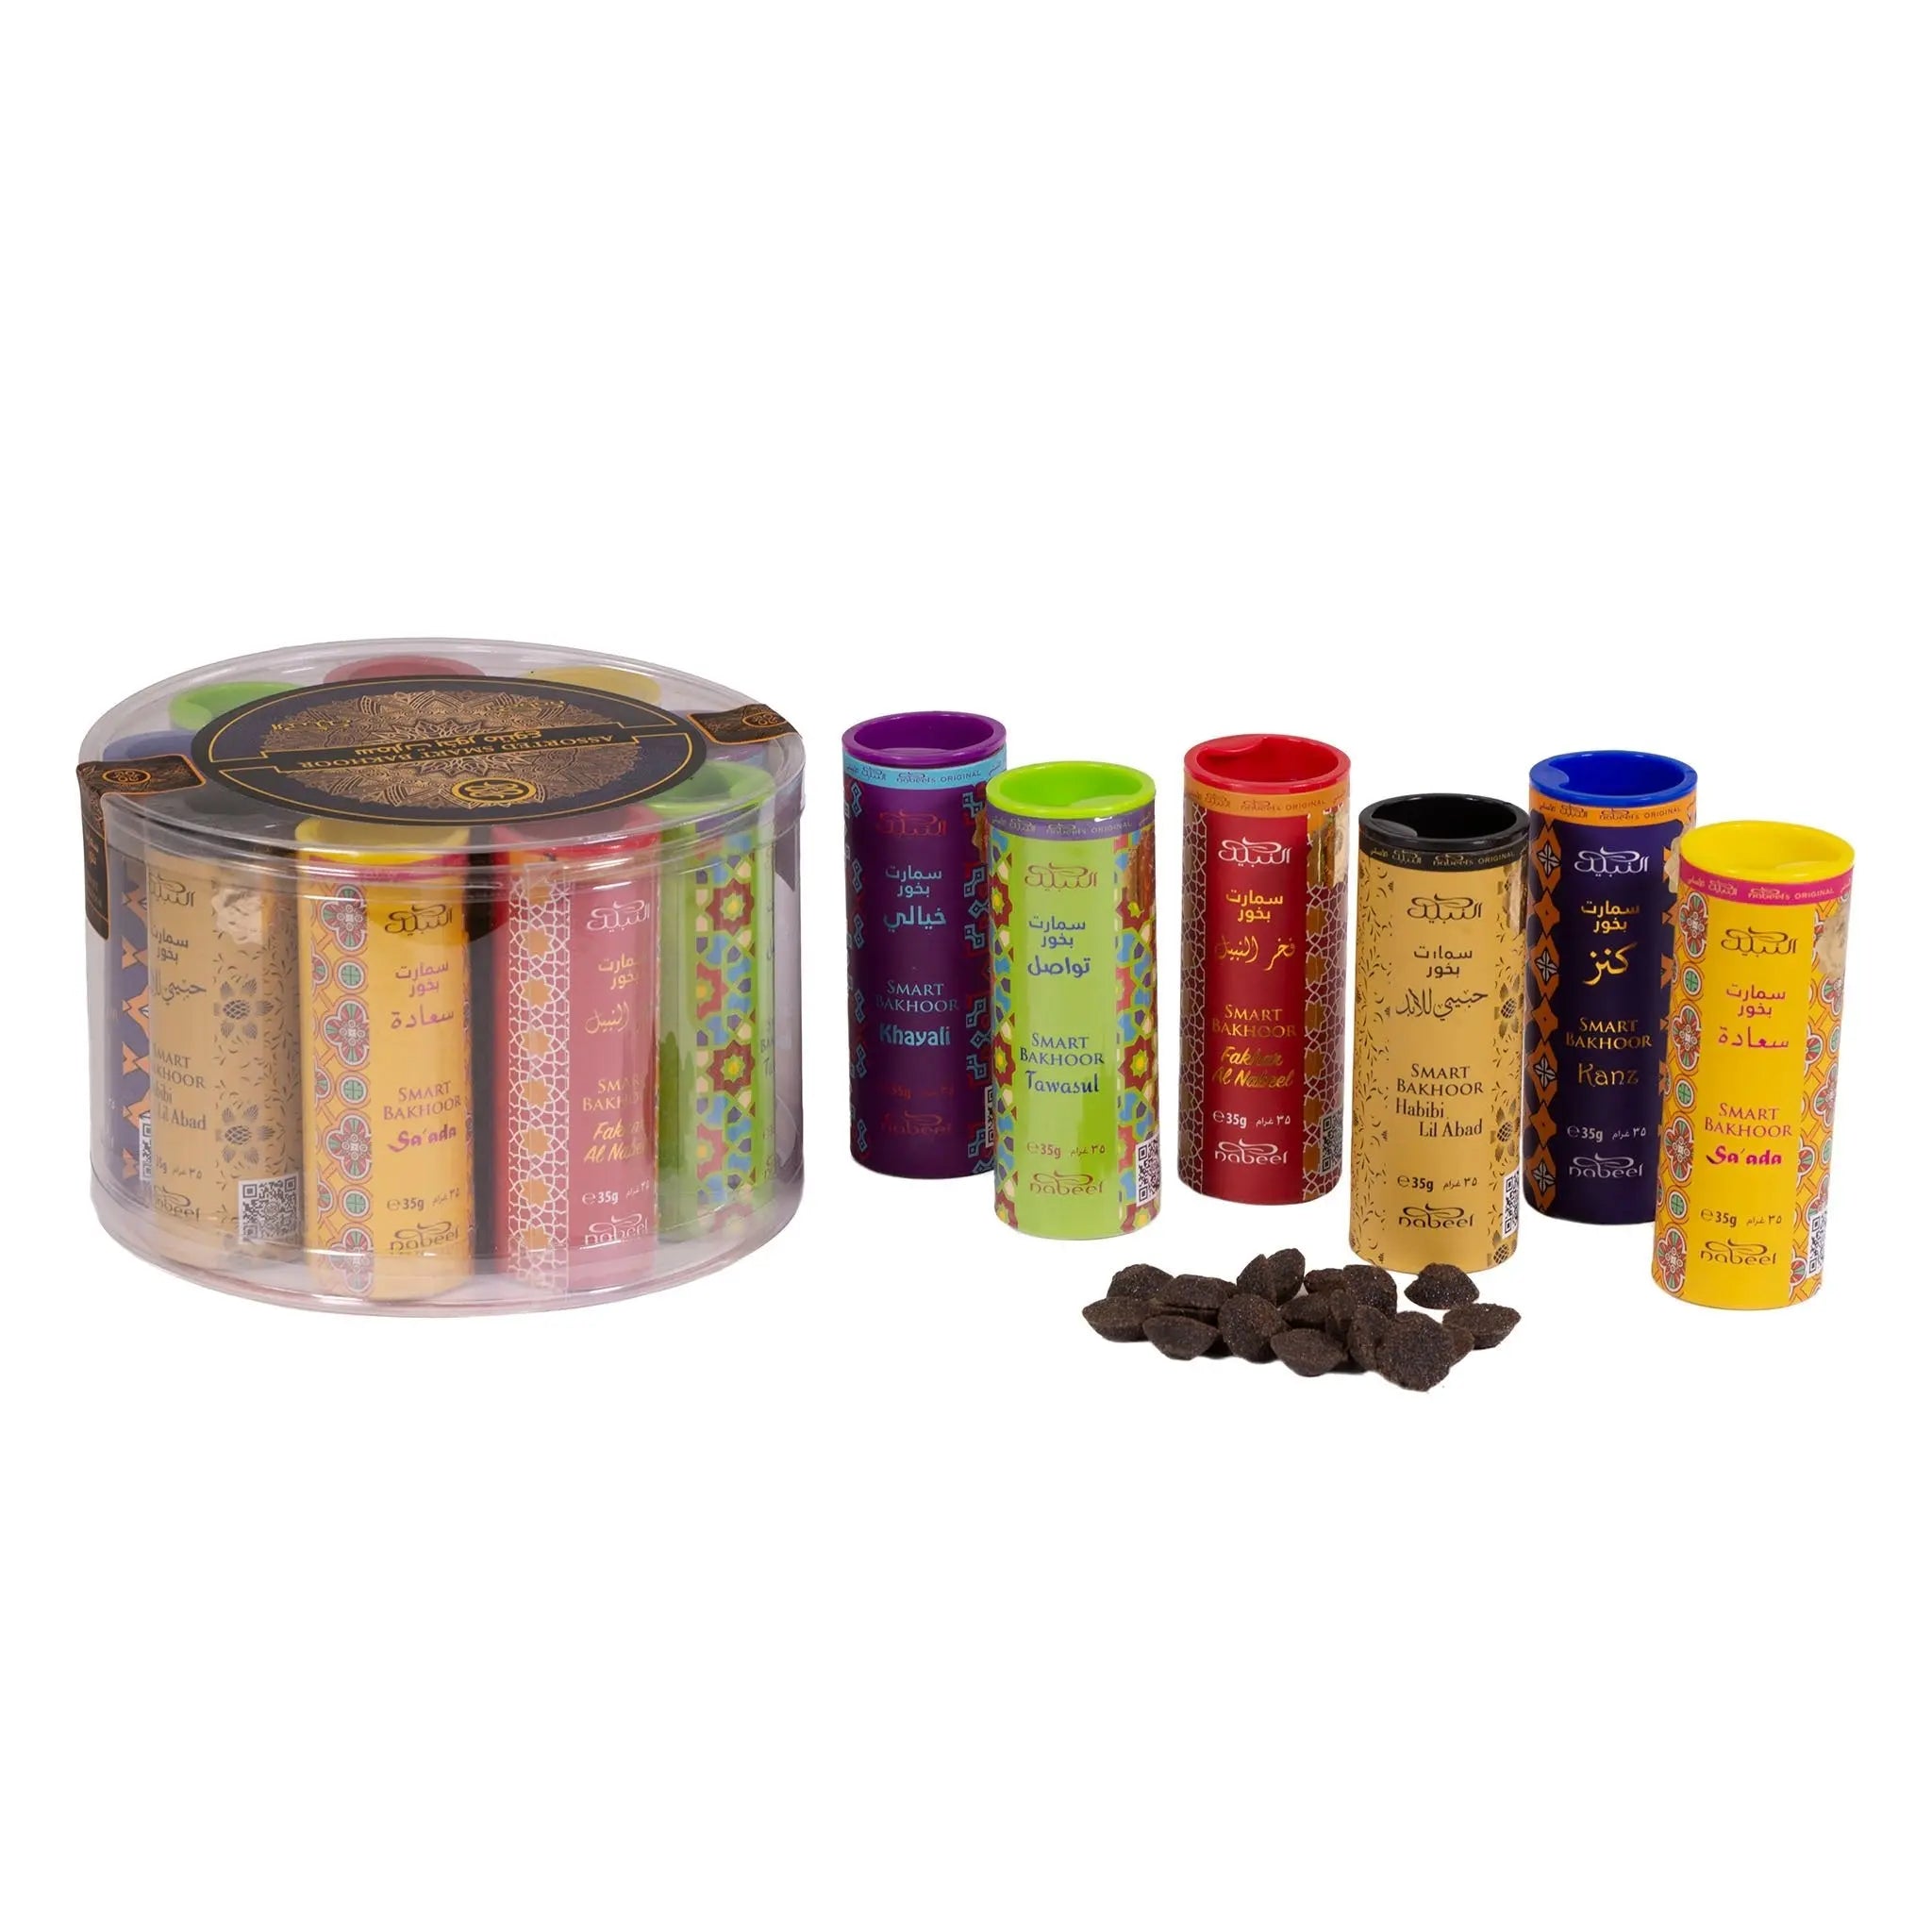 The image features a round, transparent plastic container with a variety of colorful cylindrical bakhoor tubes lined up beside it. Each tube has a different color and is adorned with Arabic calligraphy and English text, possibly indicating different fragrances like "Oud," "Musk," and others. In front of the tubes, there is a small pile of dark brown bakhoor pieces, which are traditionally used for scenting spaces.